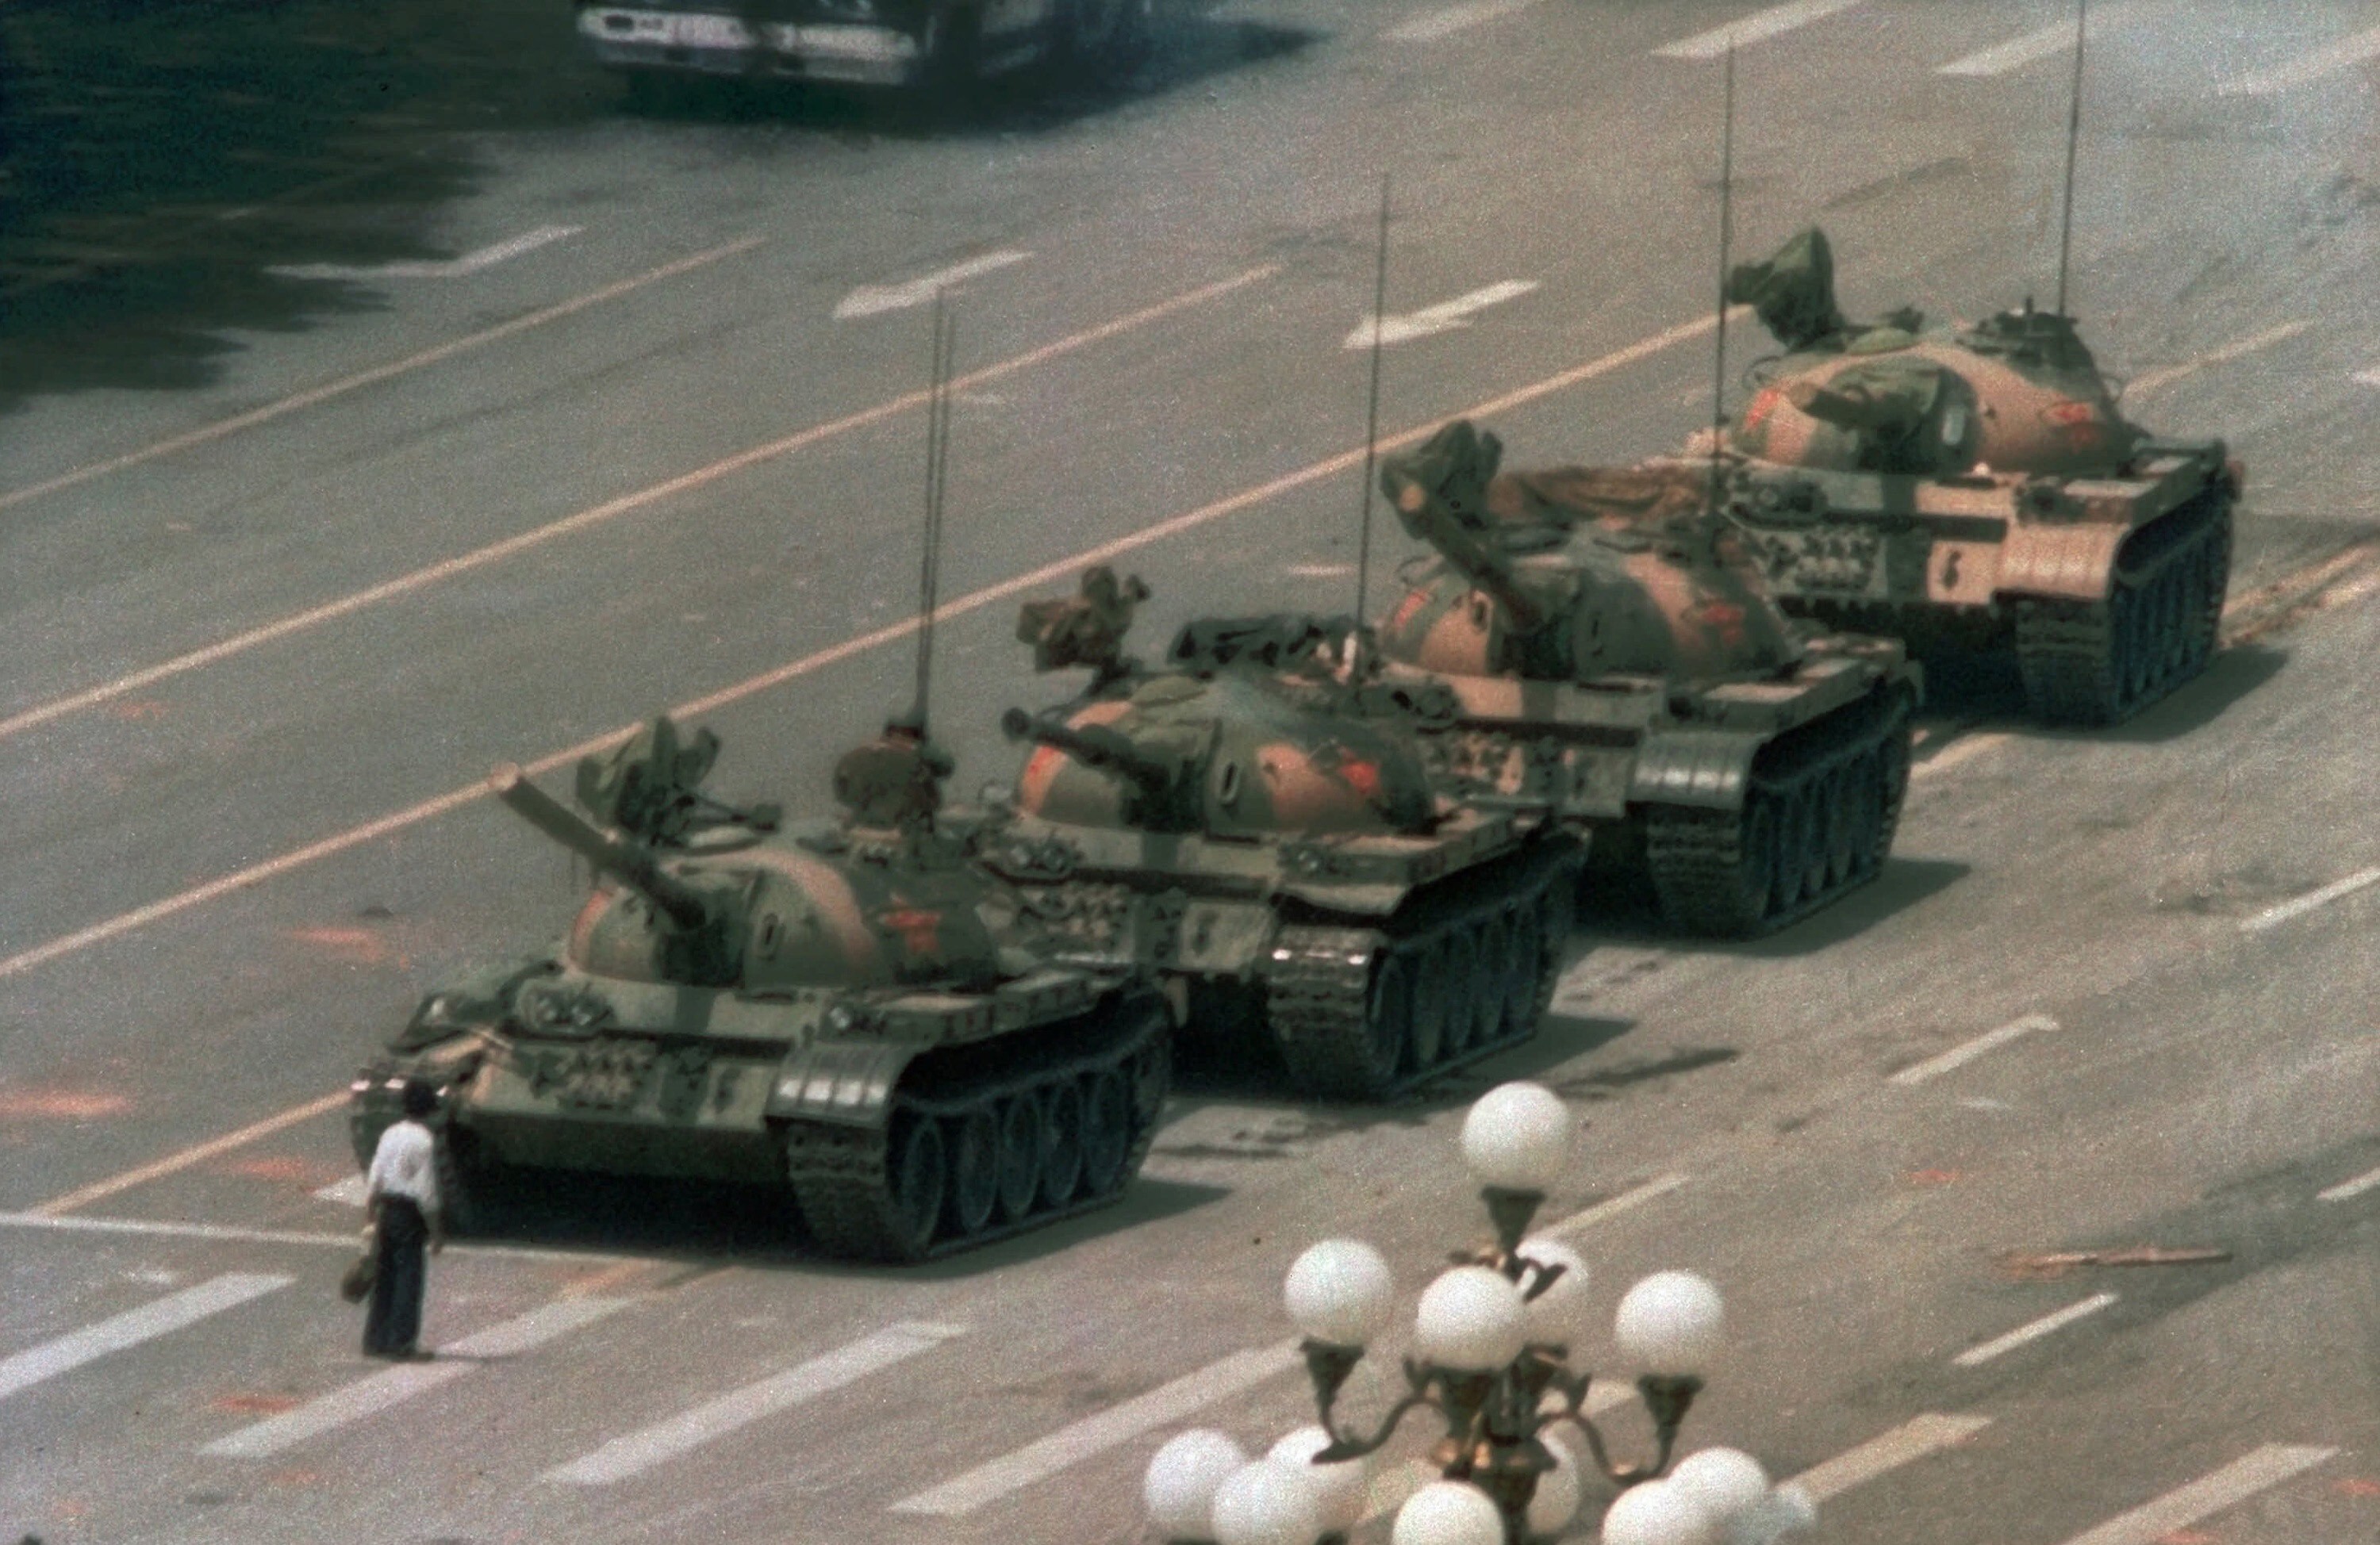 A man stands in front of a line of tanks at Tiananmen Square in Beijing on June 5, 1989. Photo: AP